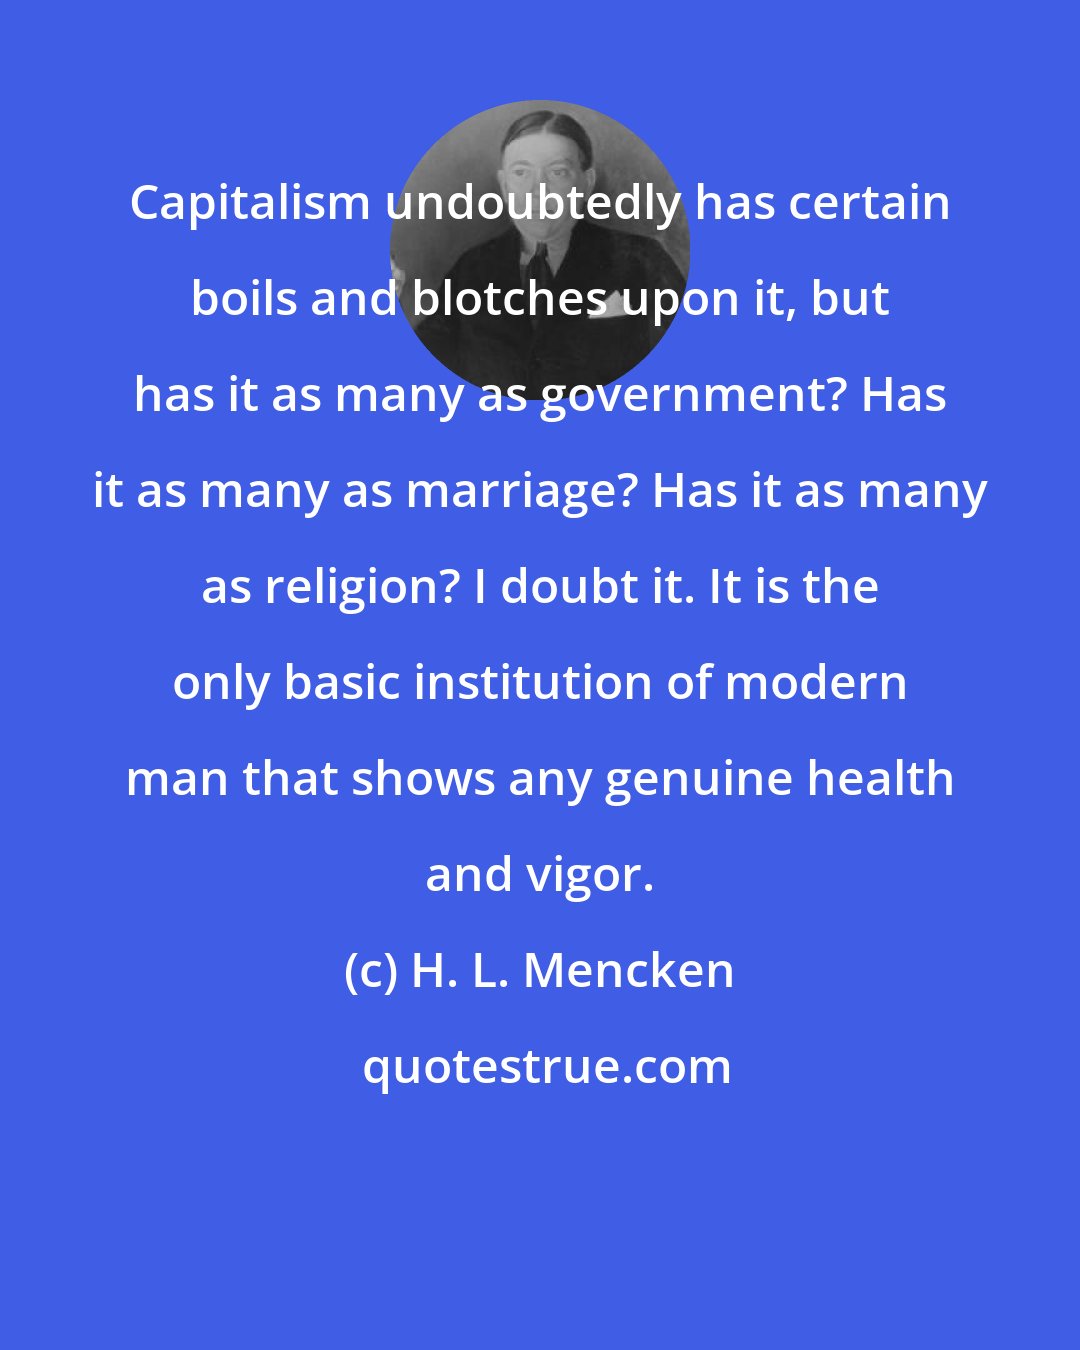 H. L. Mencken: Capitalism undoubtedly has certain boils and blotches upon it, but has it as many as government? Has it as many as marriage? Has it as many as religion? I doubt it. It is the only basic institution of modern man that shows any genuine health and vigor.